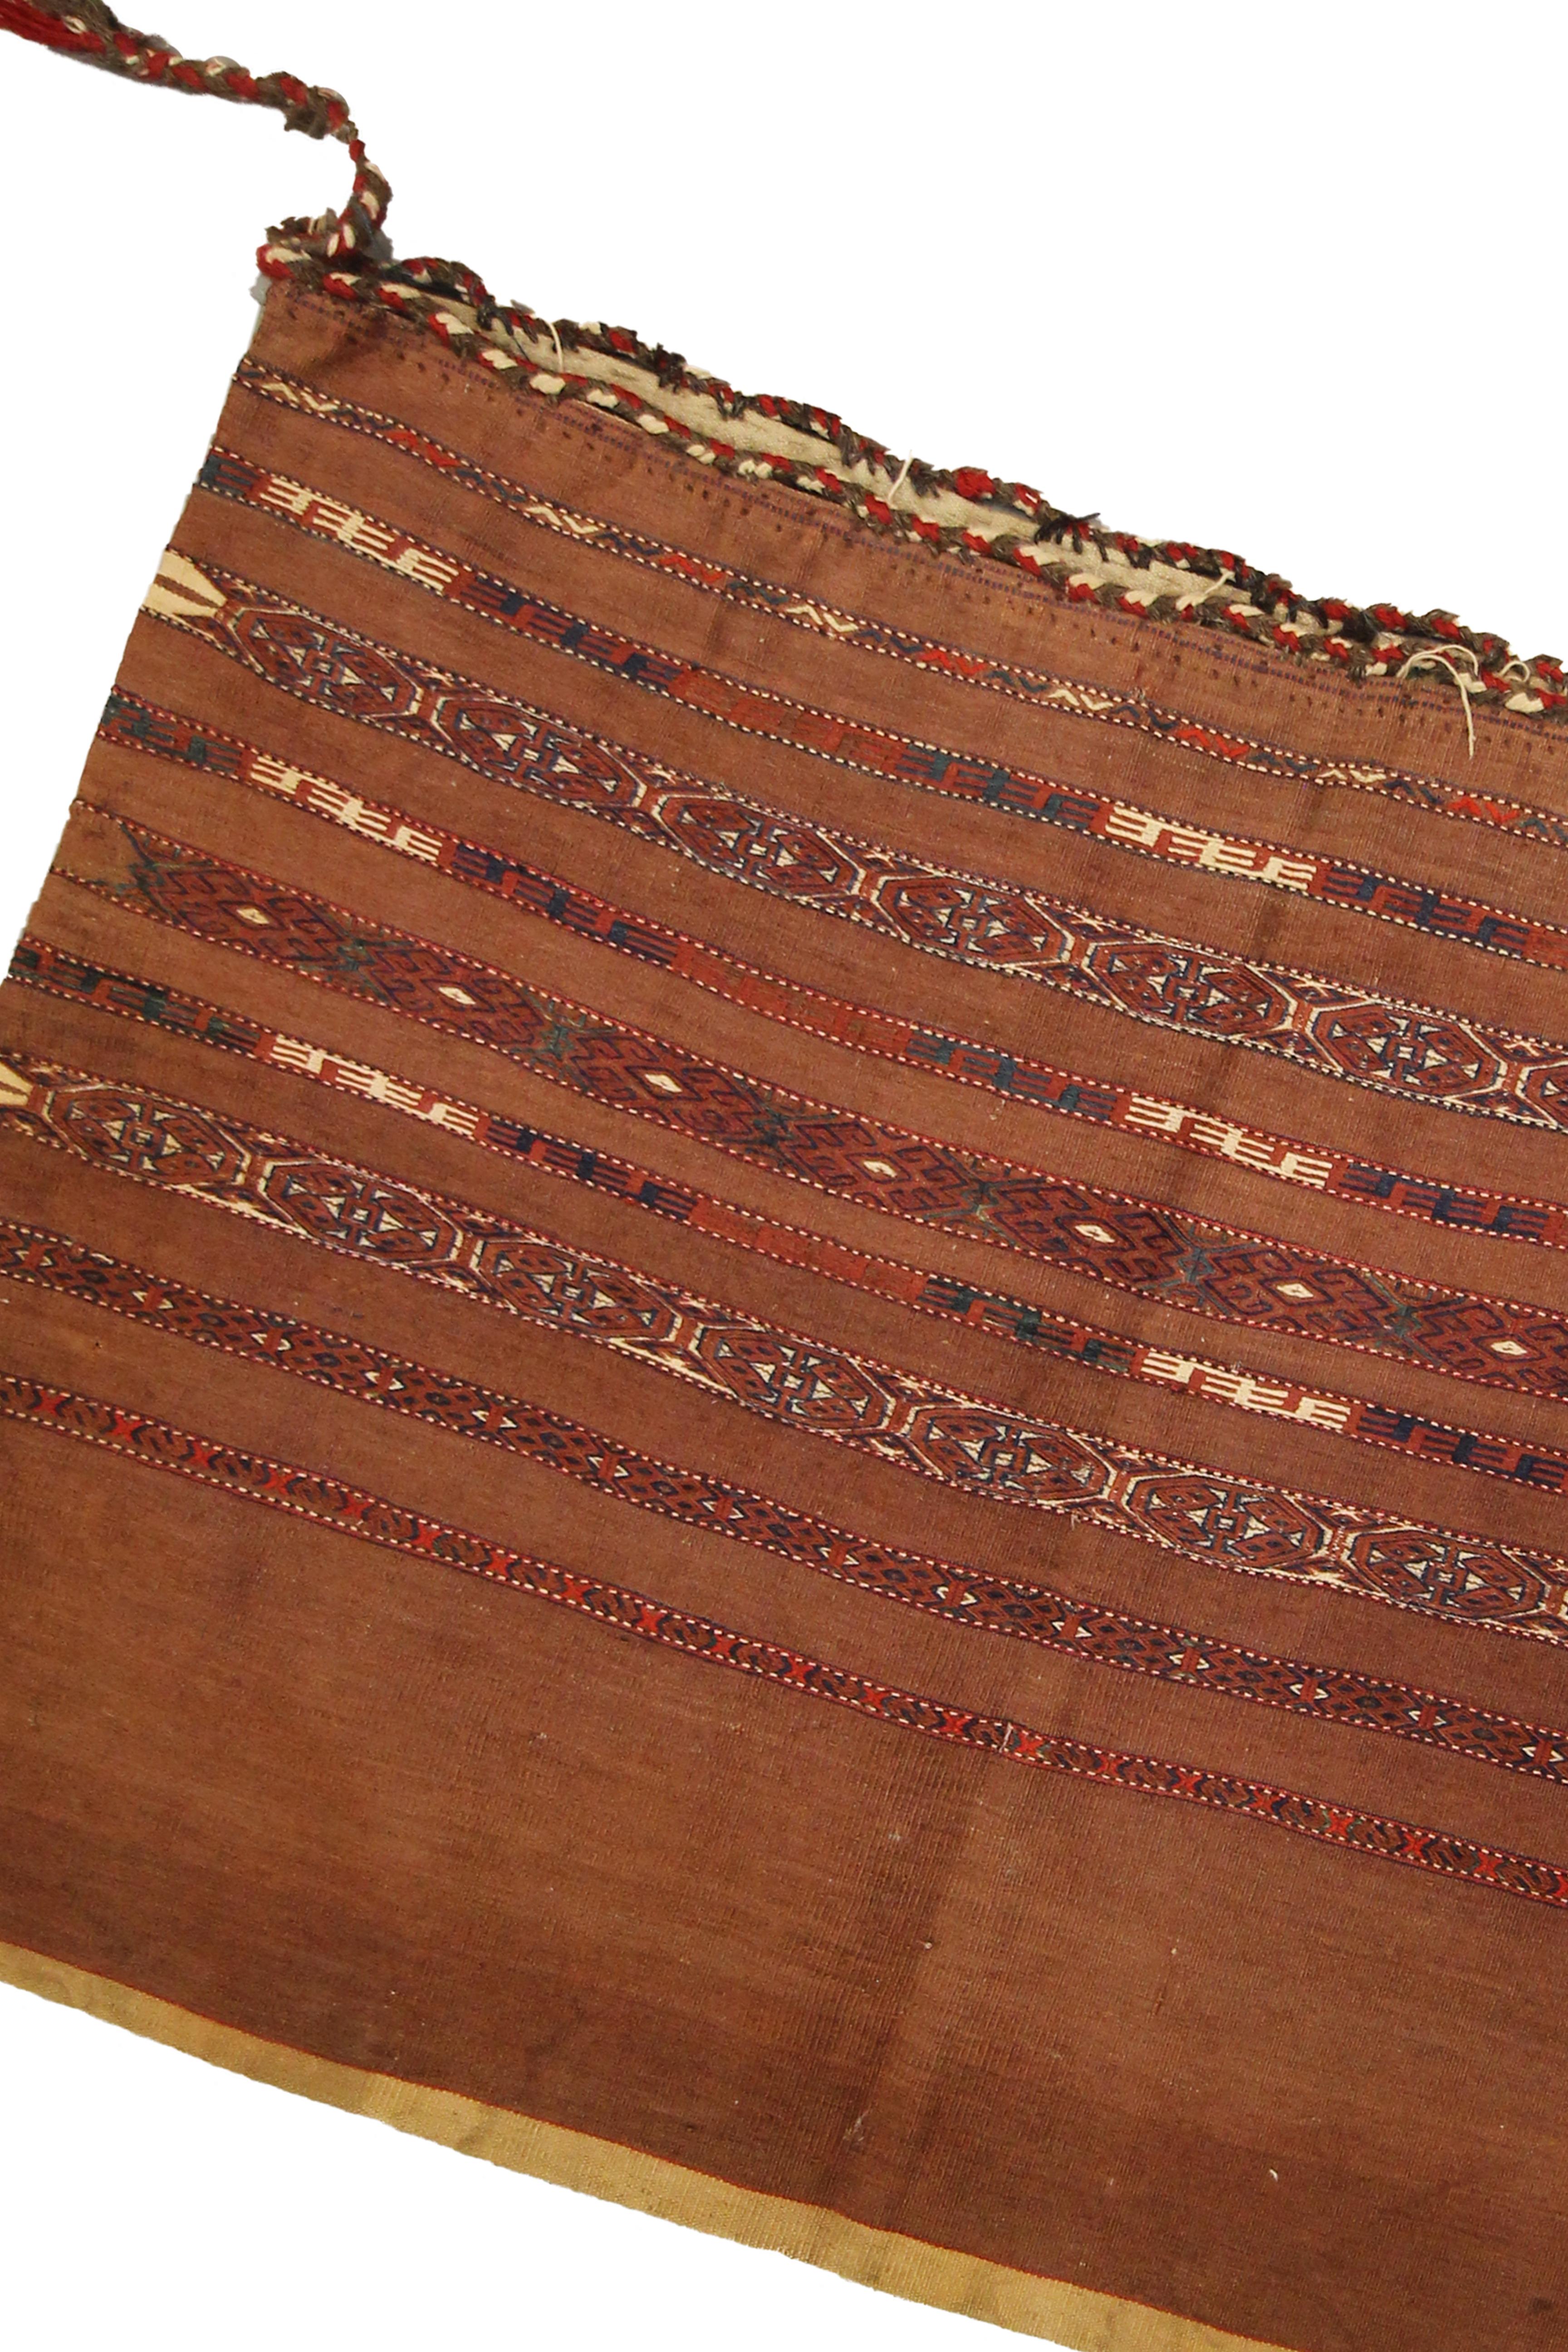 This fine wool textile is a fantastic example of handwoven rugs from the early 20th century, circa 1900. The design is simple with a rust background and a stripe geometric pattern woven in accents of blue, brown and cream. Both the colour and design